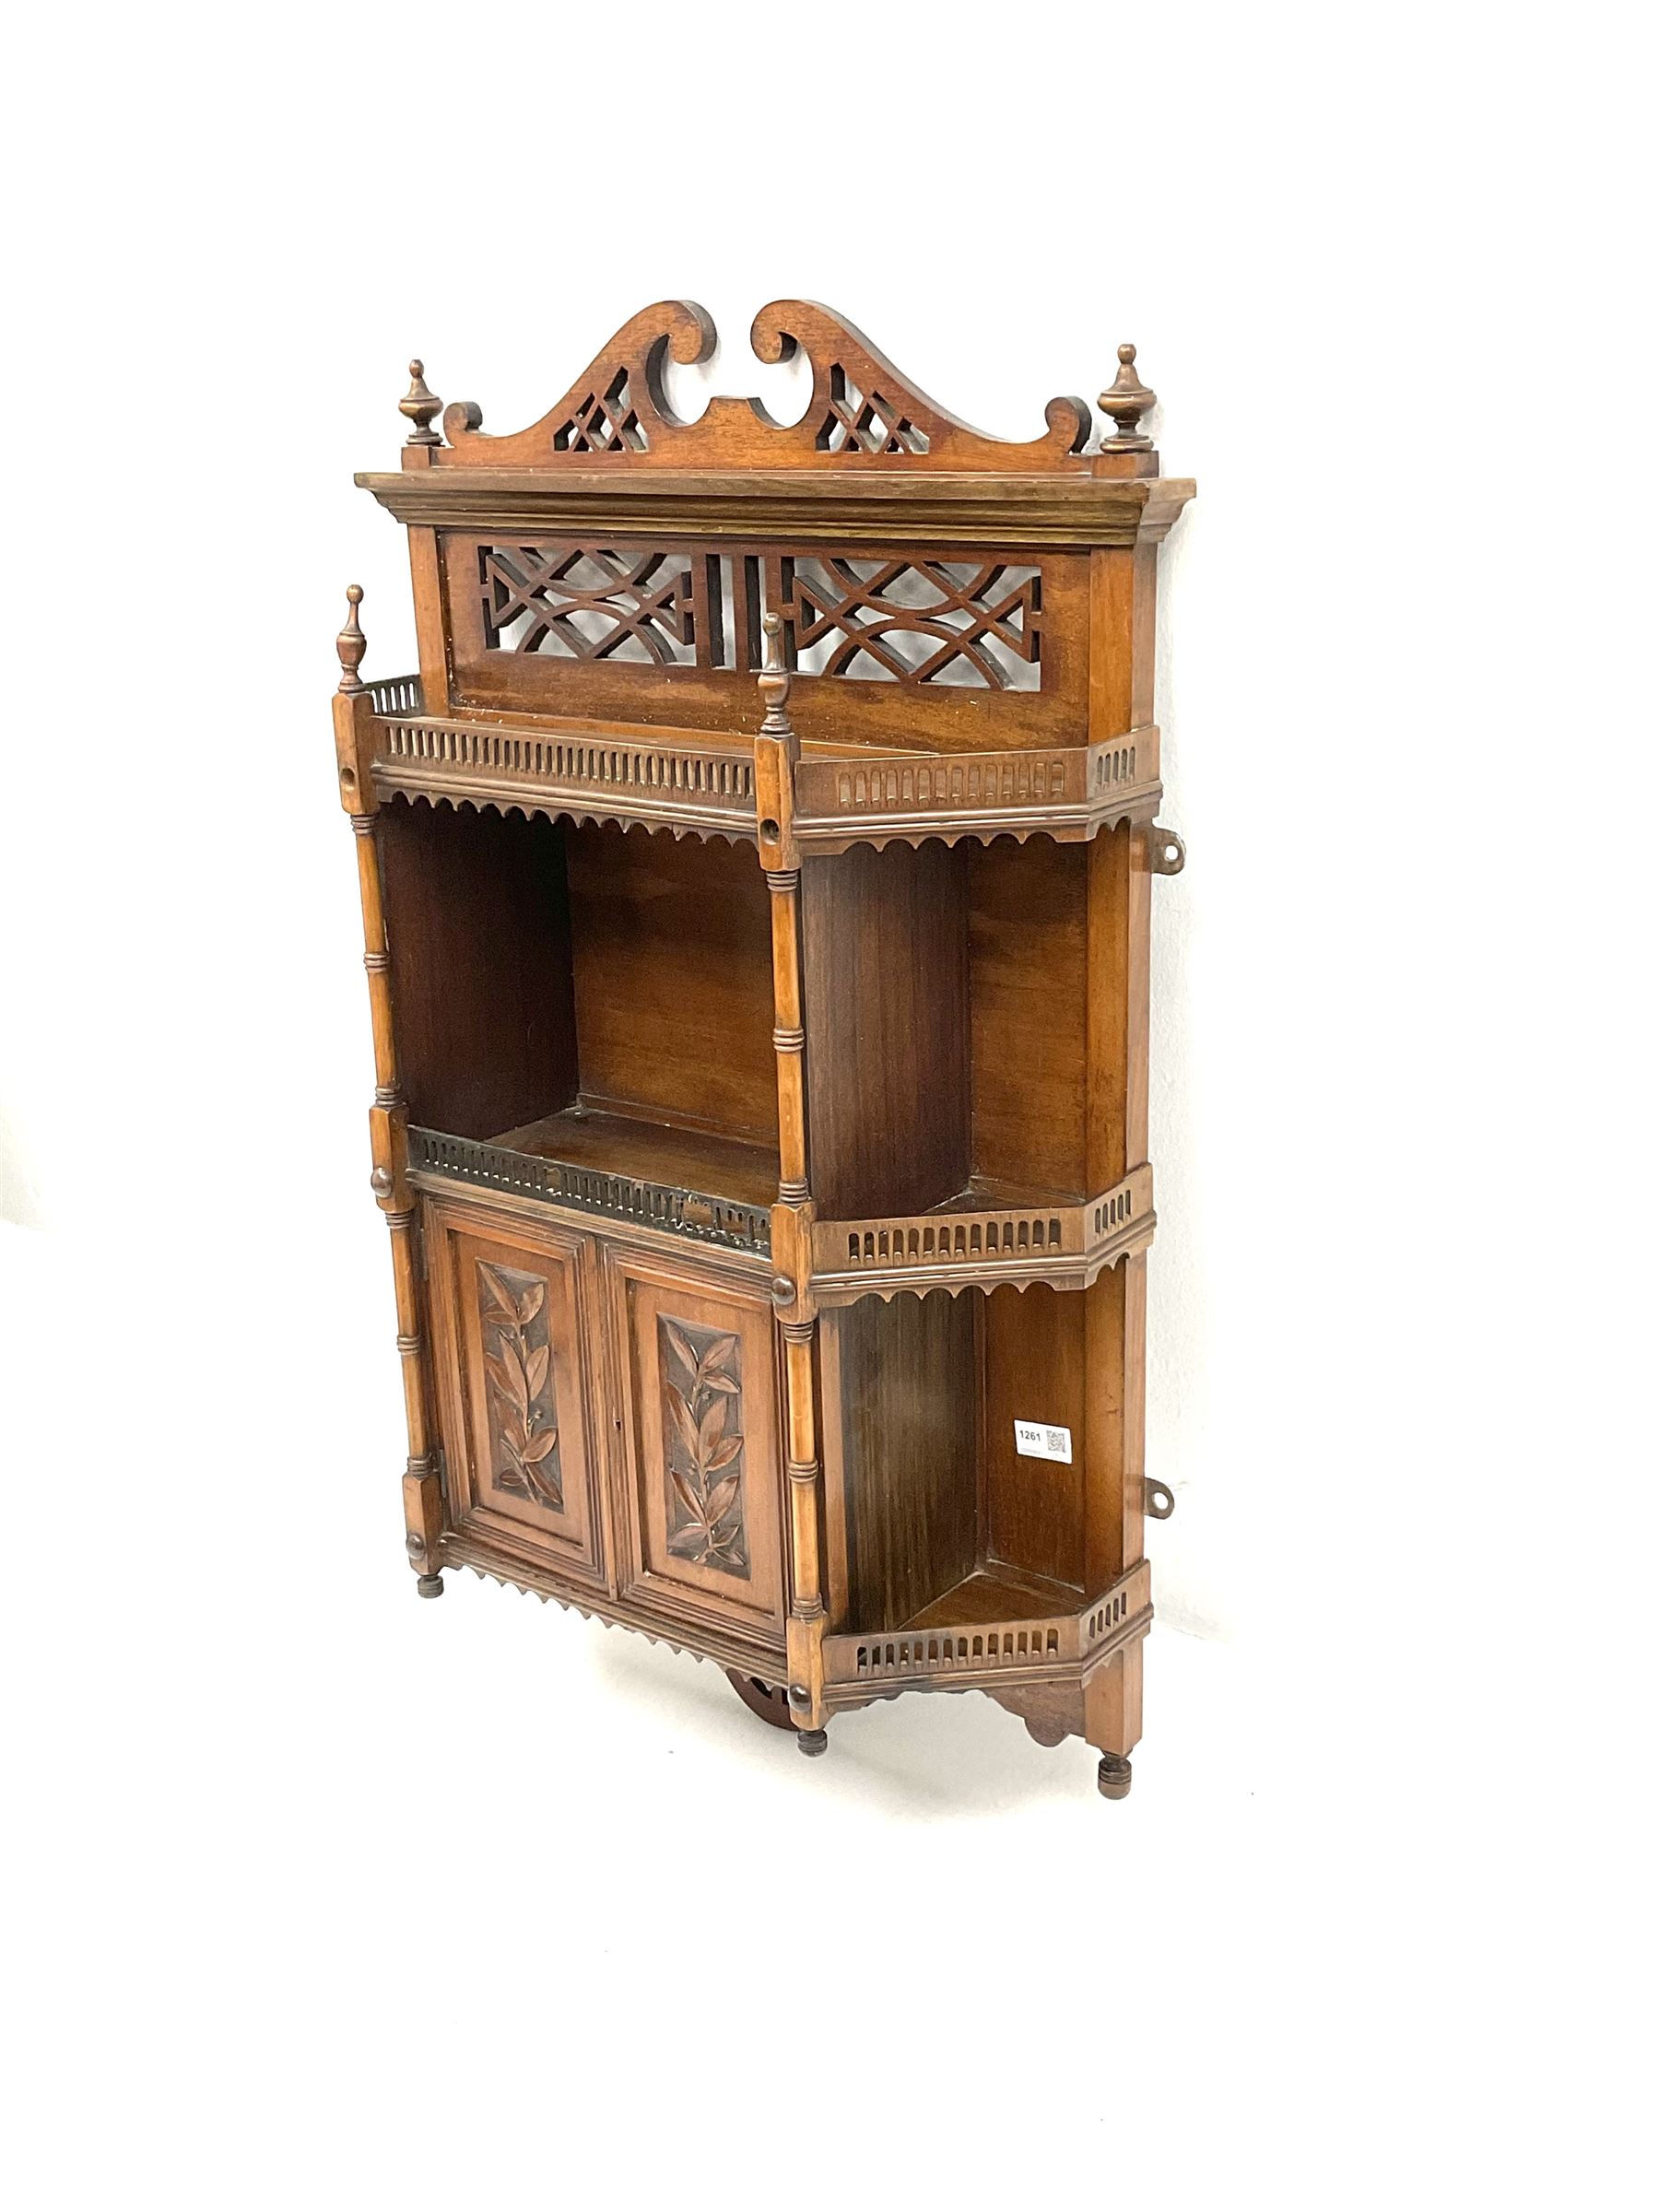 Early 20th century mahogany wall hanging cabinet - Image 2 of 2